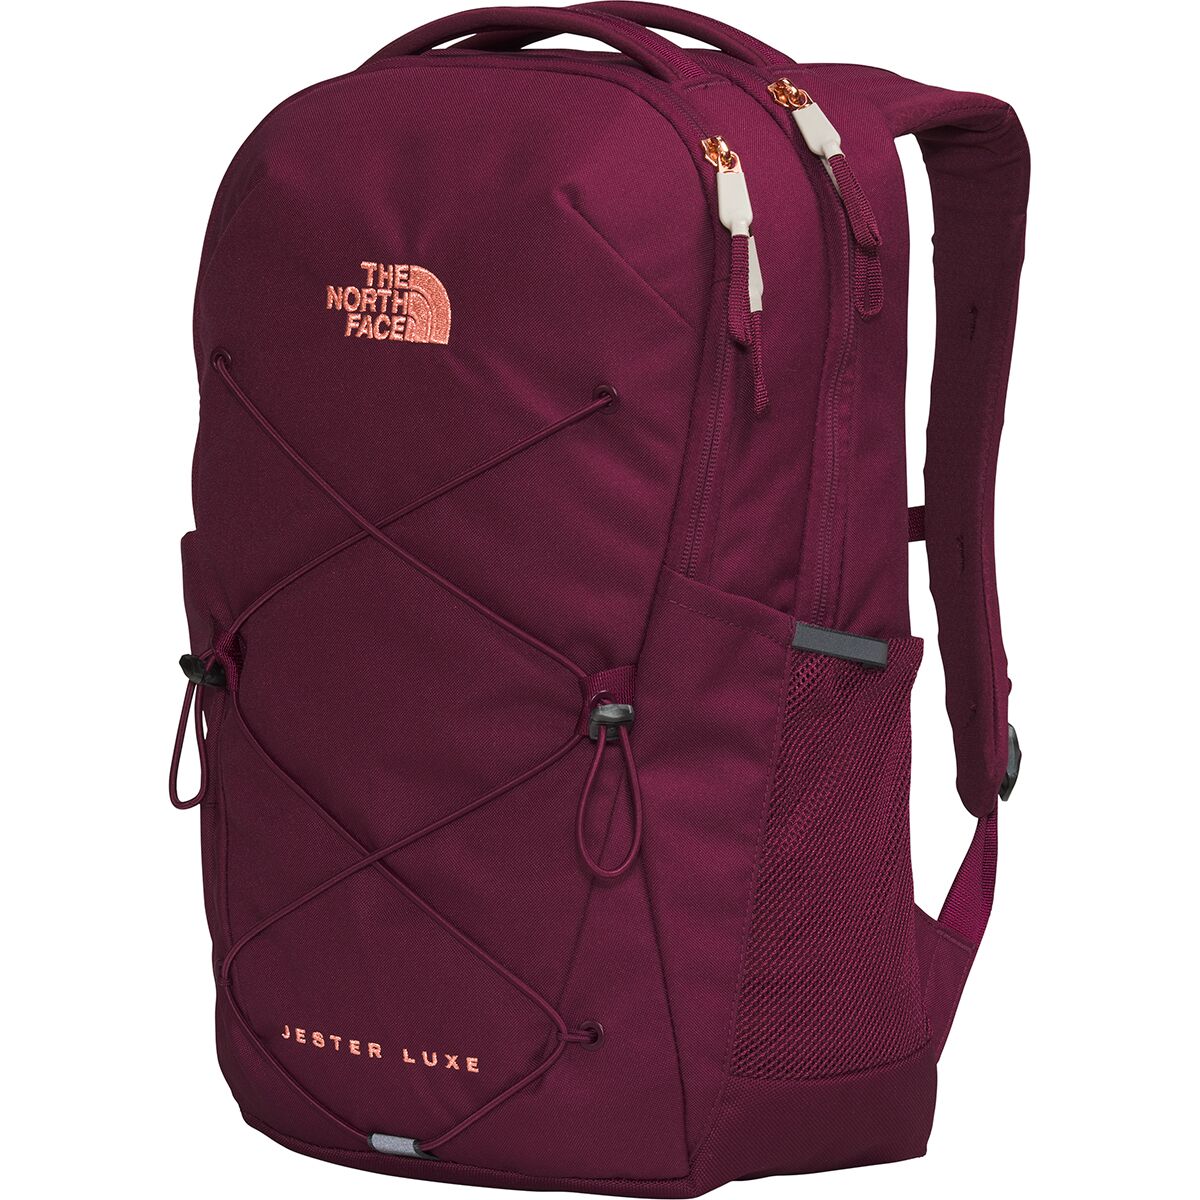 The North Face Jester Luxe Pack - Women's